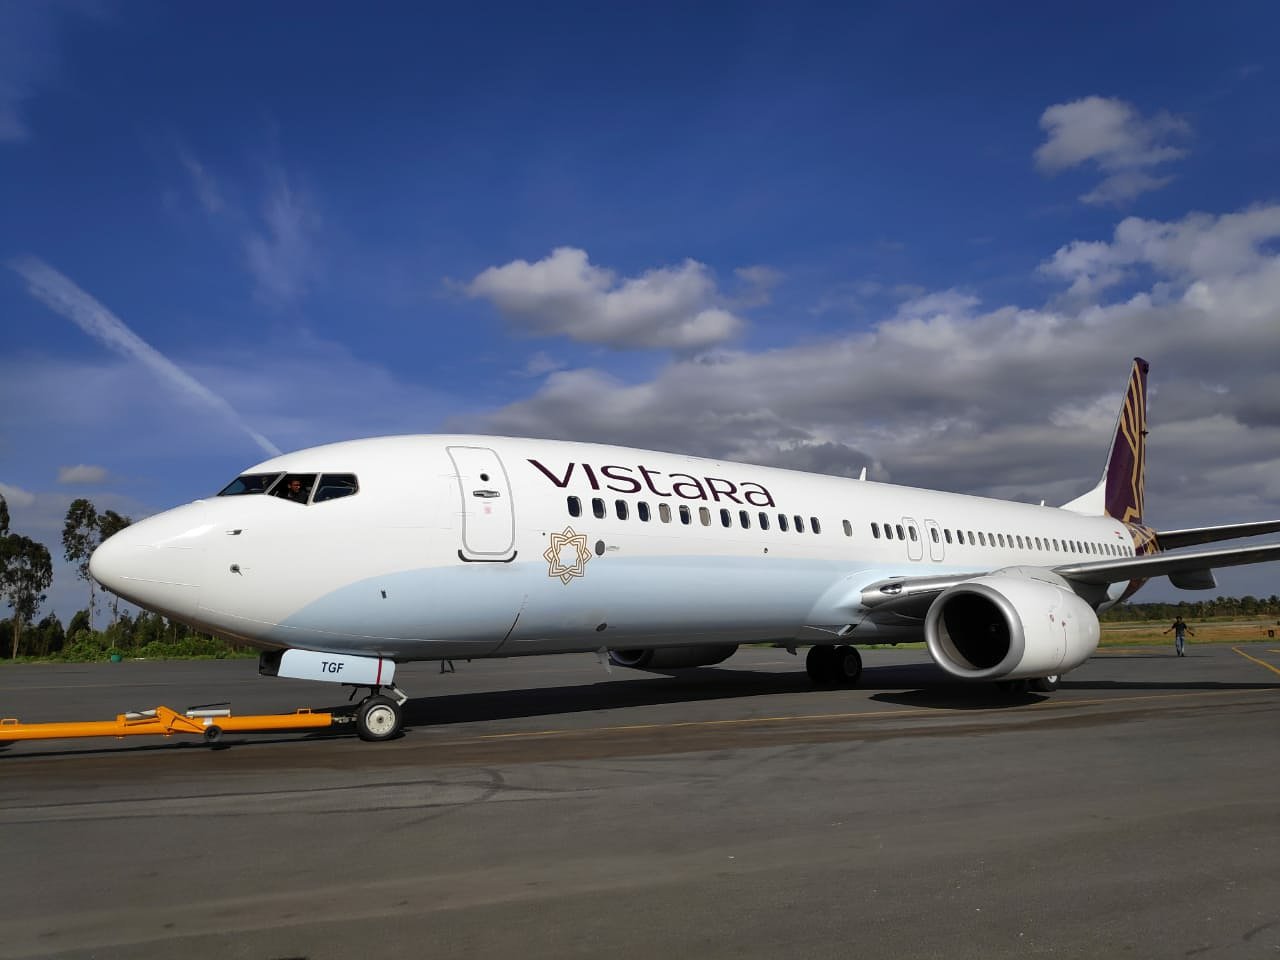 Vistara Flight Makes Emergency Landing At Lucknow As They Run Out Of Fuel